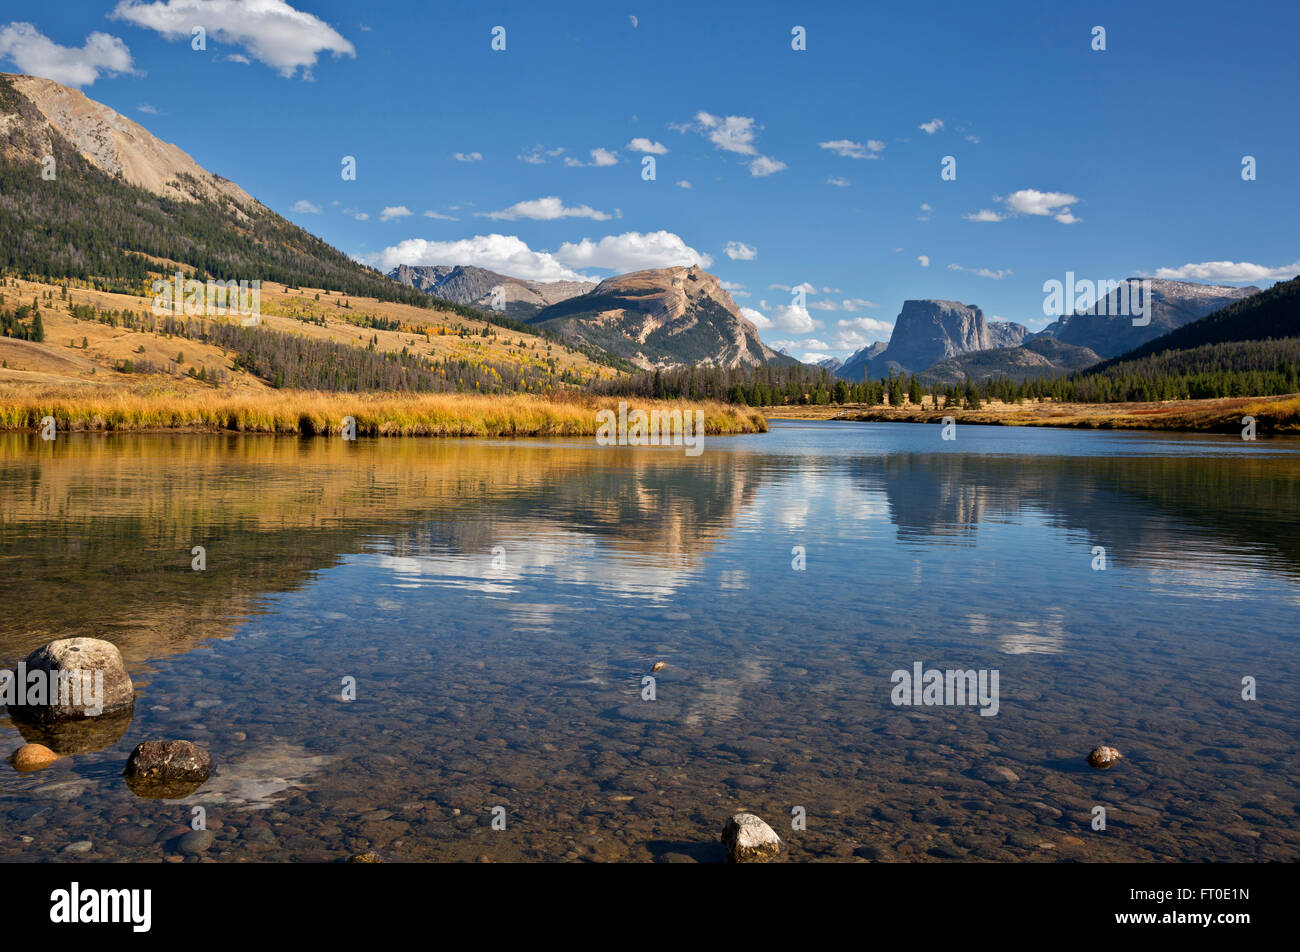 WY01377-00...WYOMING - Squaretop Mountain and the Green River in the Teton National Forest section of the Wind River Range. Stock Photo